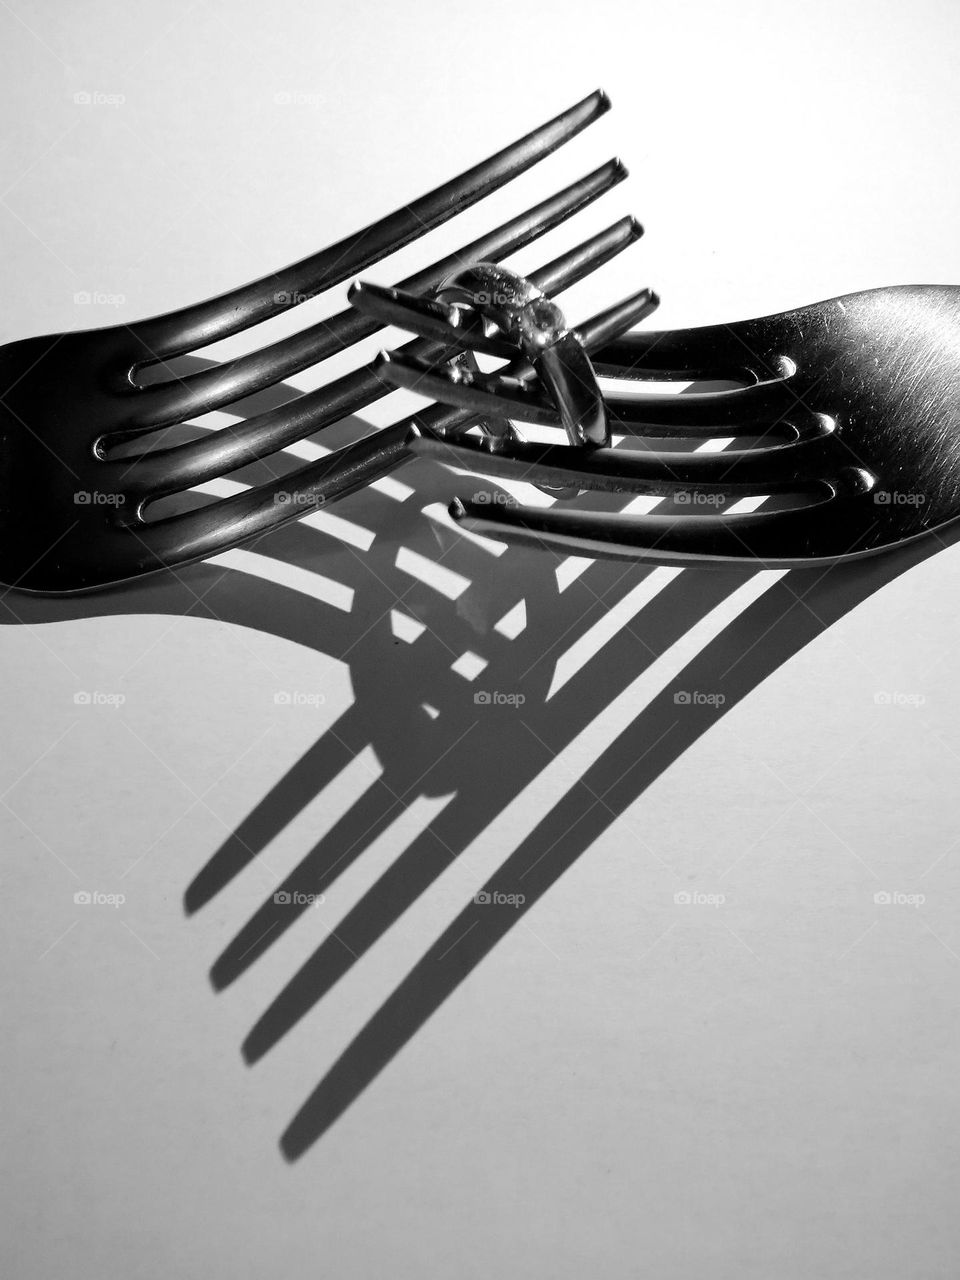 Two kitchen forks and engagement ring. Nice shadows. Not ordinary black and white photography.